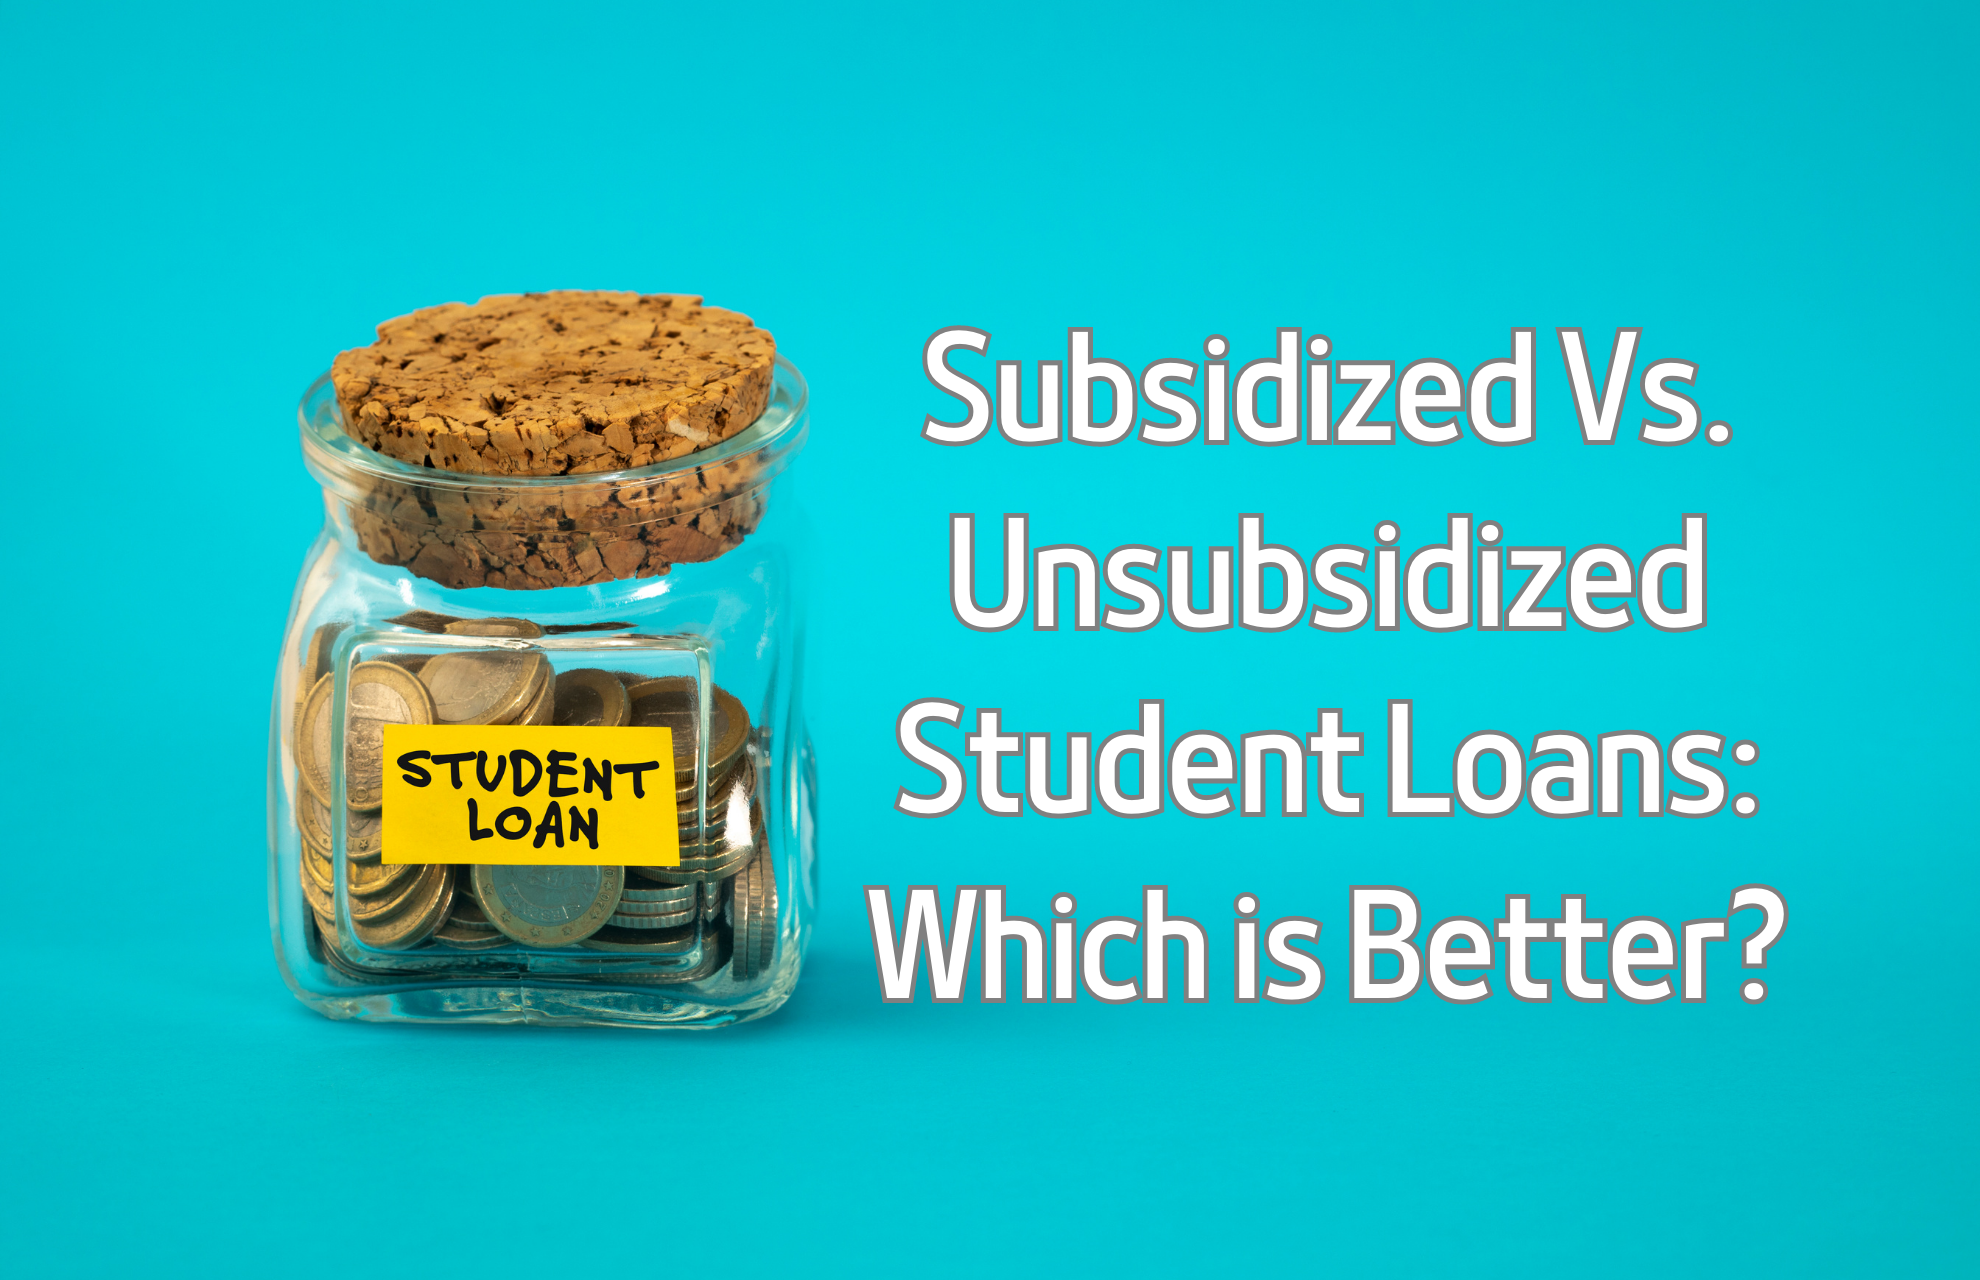 Subsidized Vs. Unsubsidized Student Loans: Which is Better?